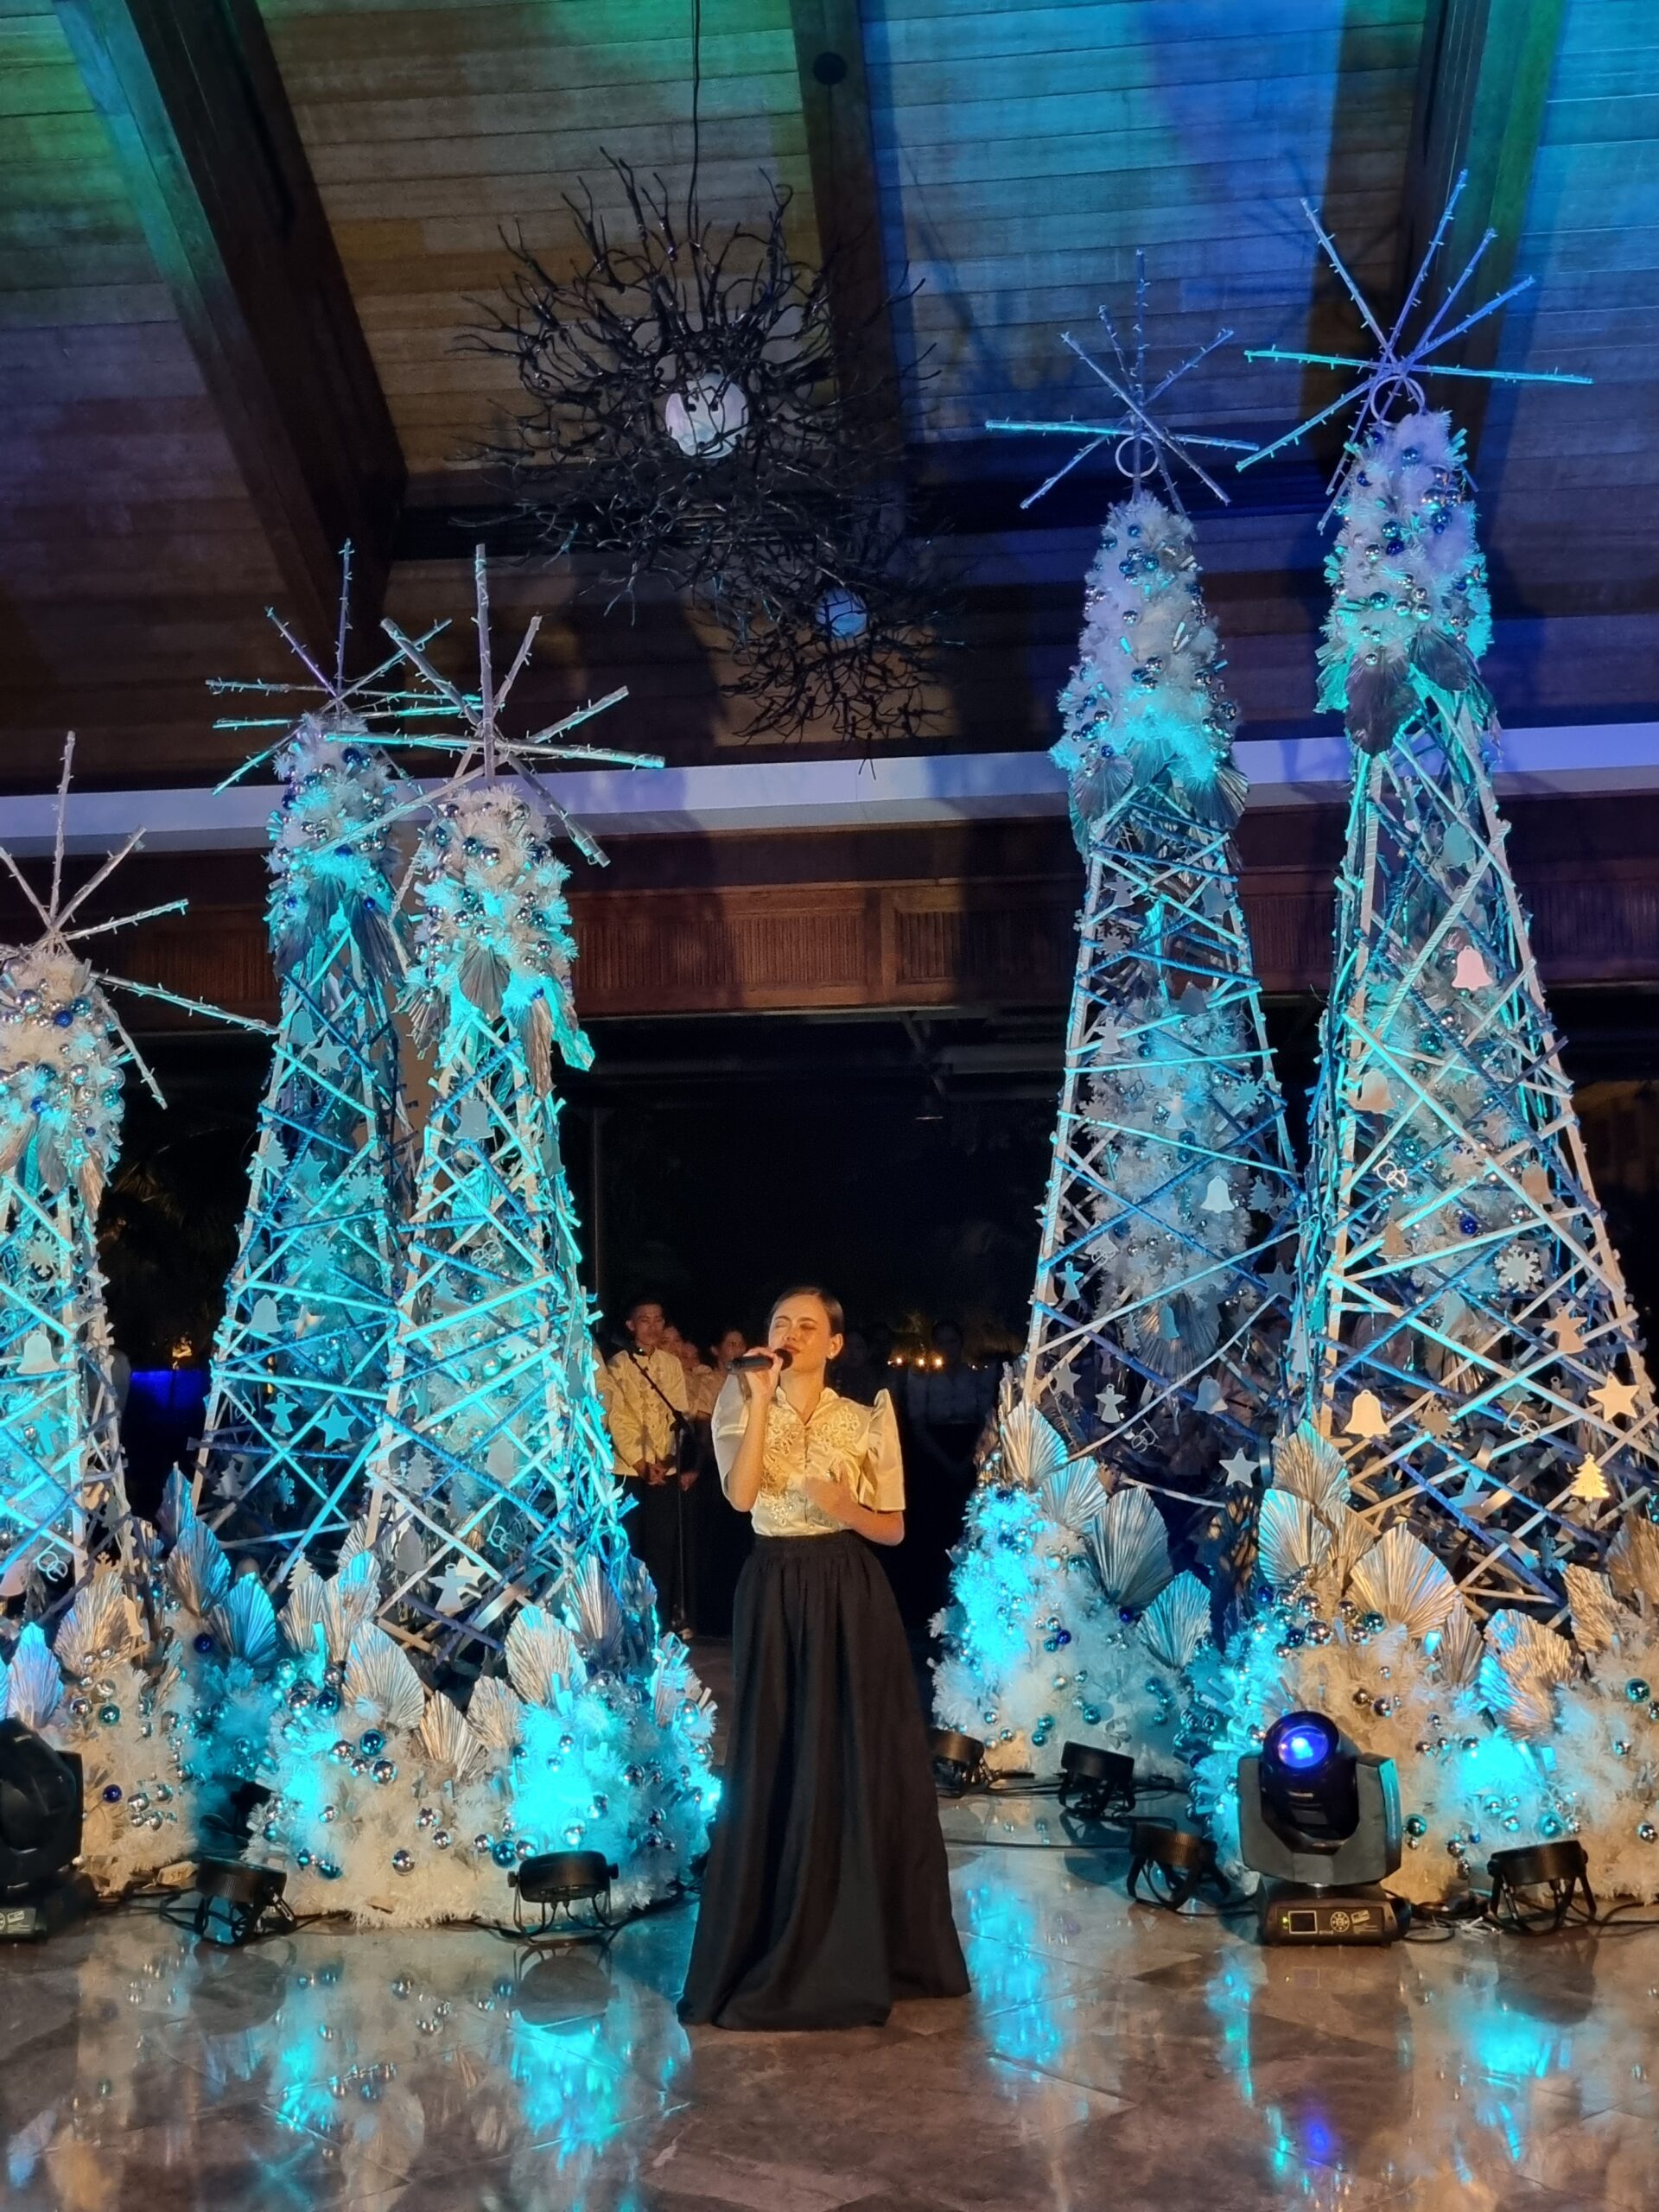 Holidays are Grander With BE Grand Resort's Five Christmas Trees